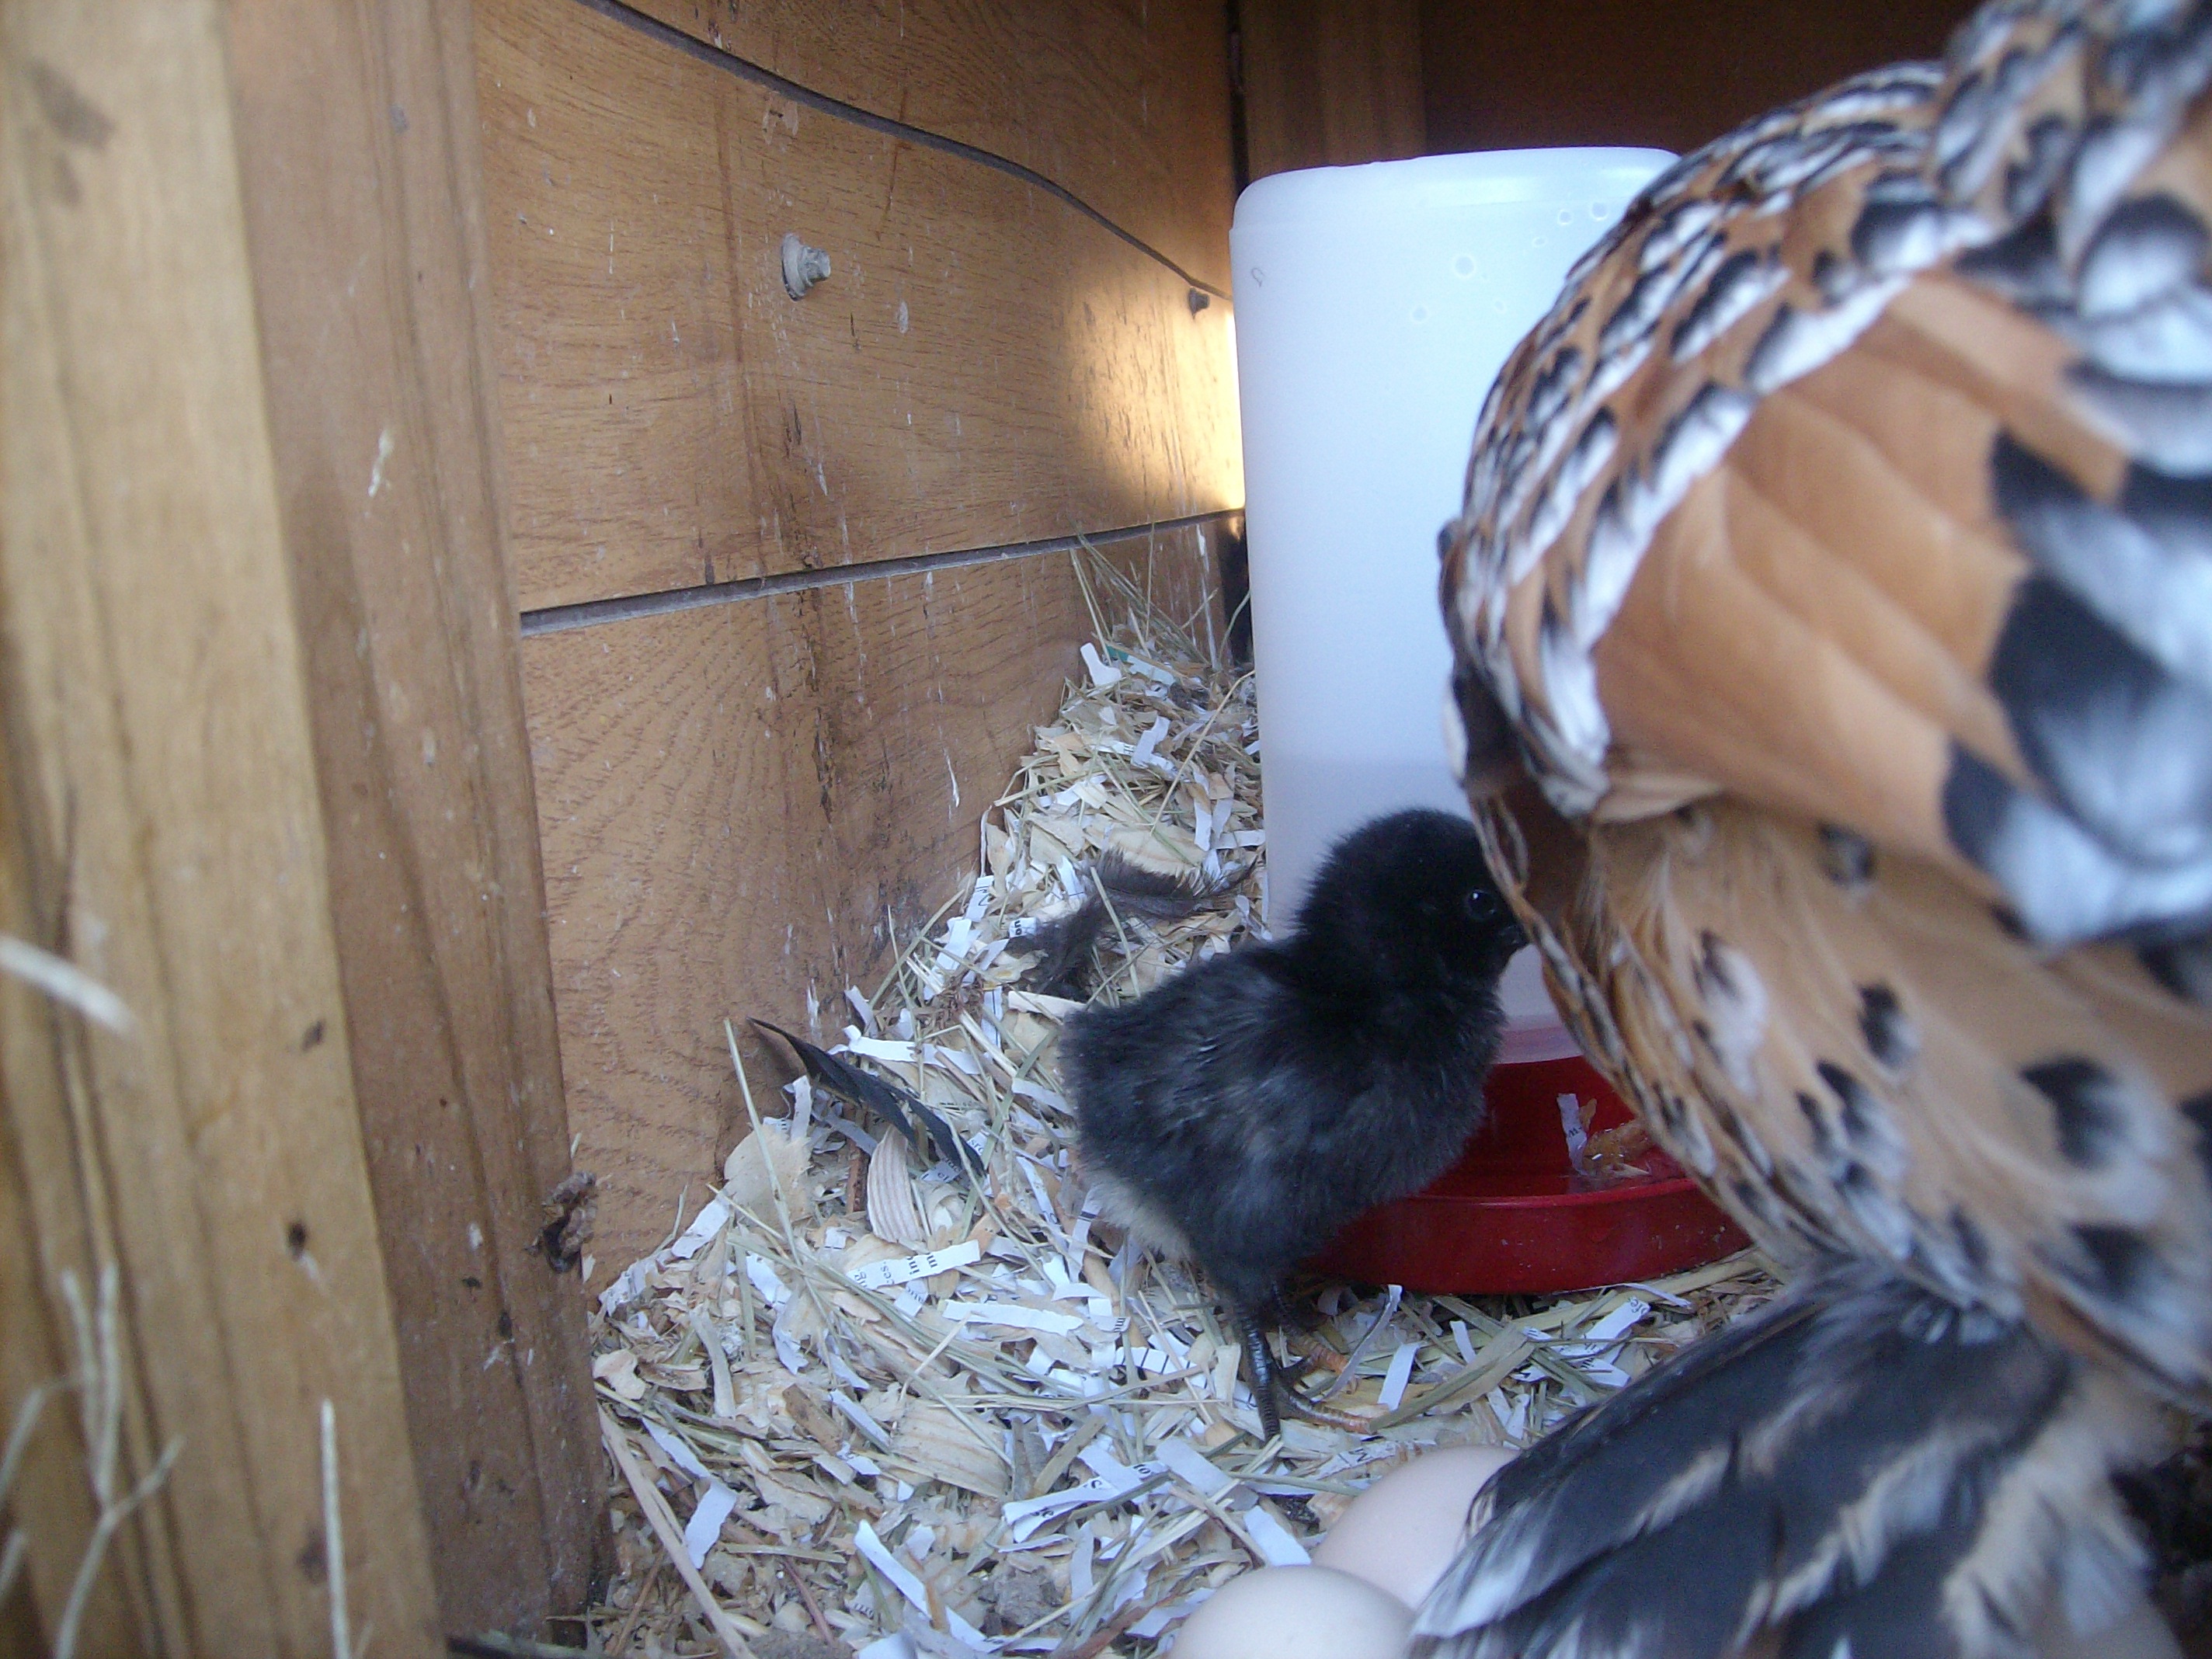 I hate to break it to Chester, but her baby doesn't have featherdy feet like her or her husband.  Hmmm... Haha.